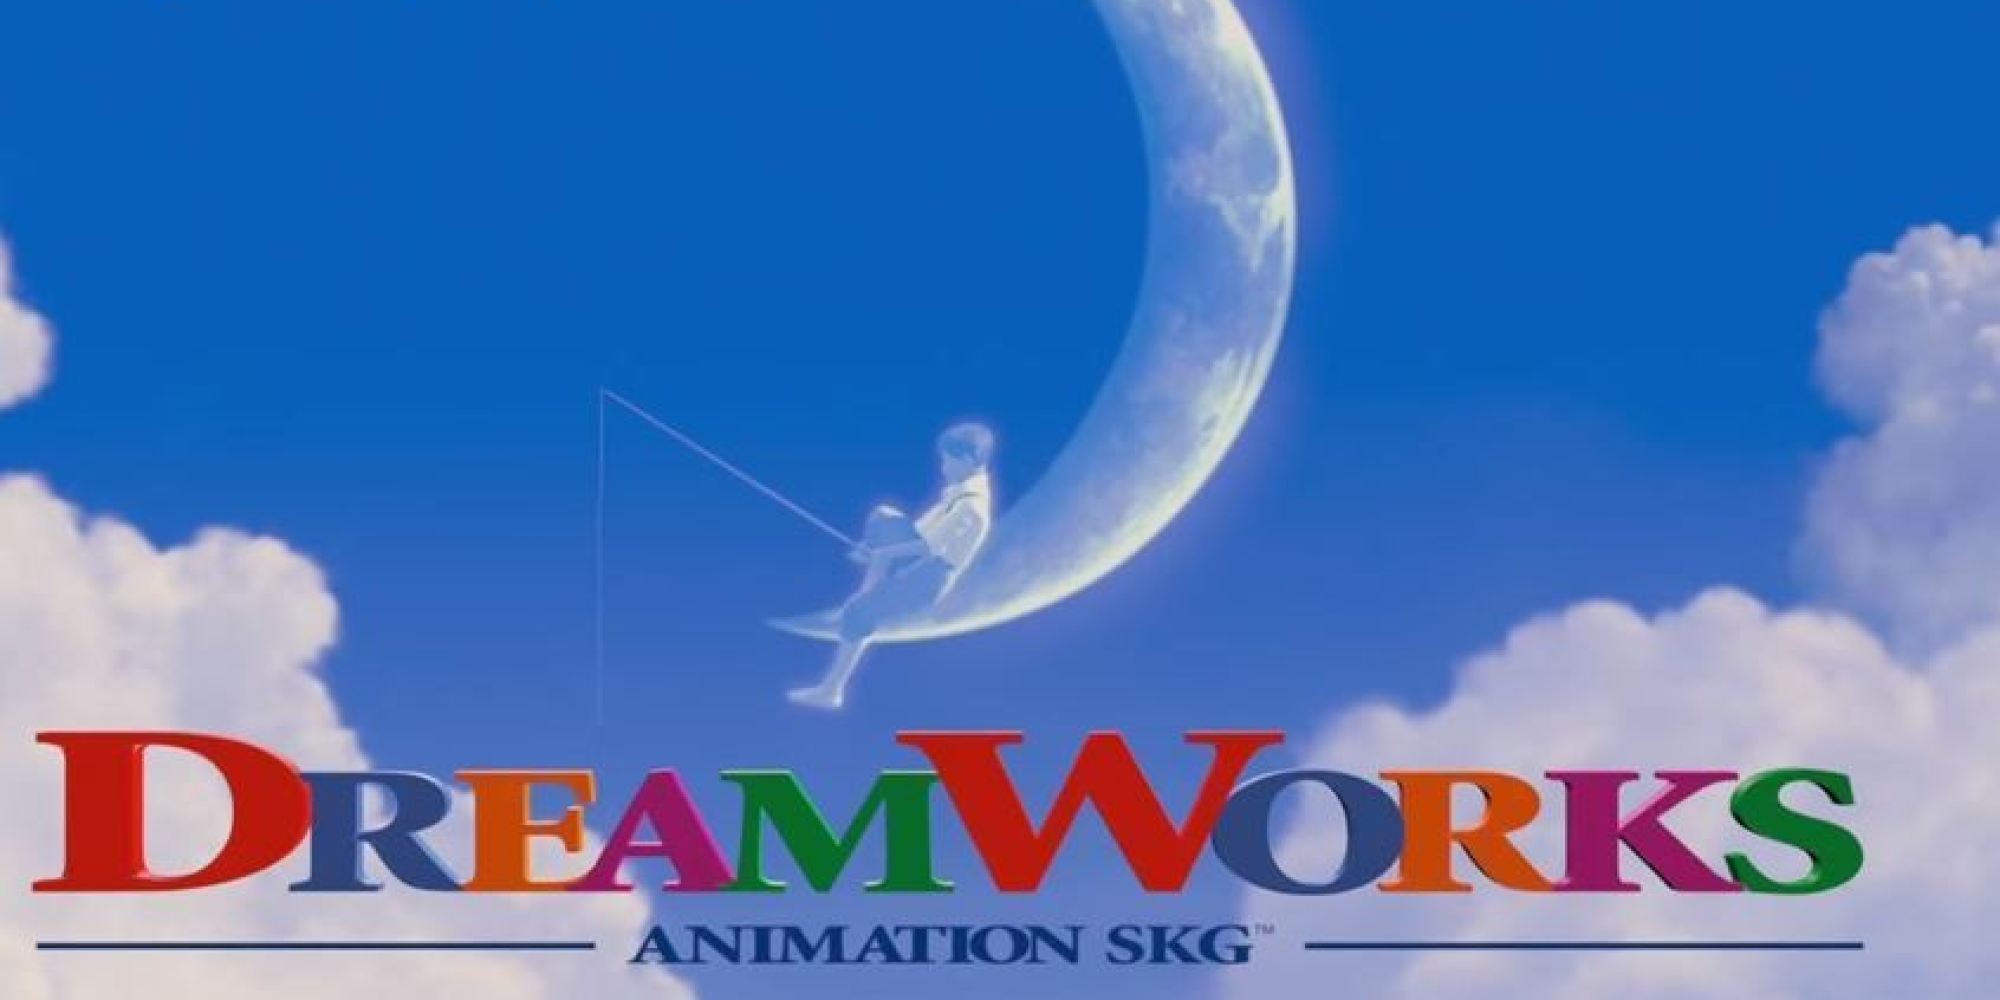 DreamWorks Pictures Logo